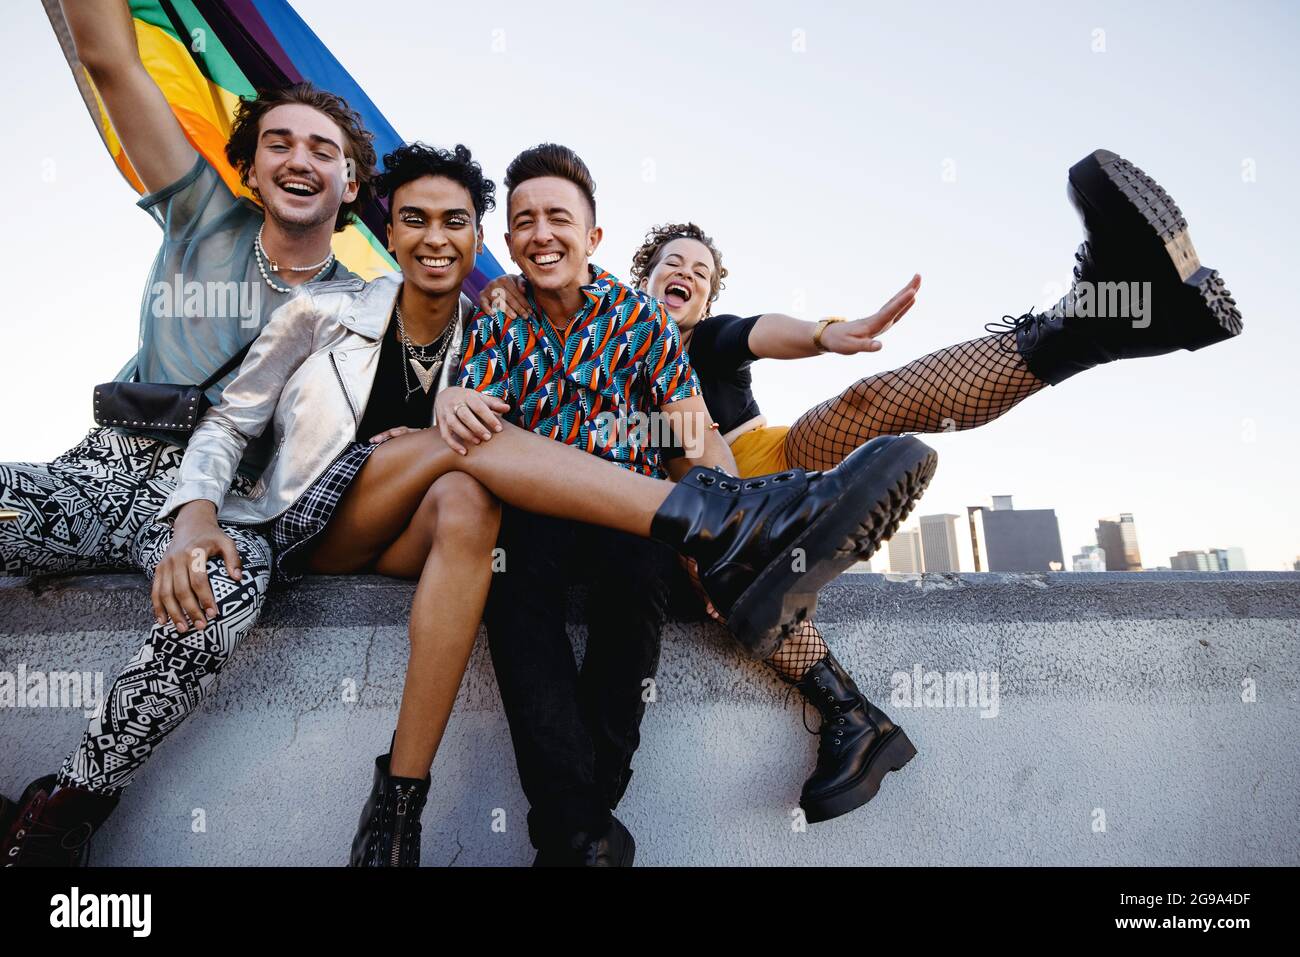 Four LGBTQ people celebrating pride while sitting together. Four friends smiling cheerfully while raising the rainbow pride flag. Group of young queer Stock Photo